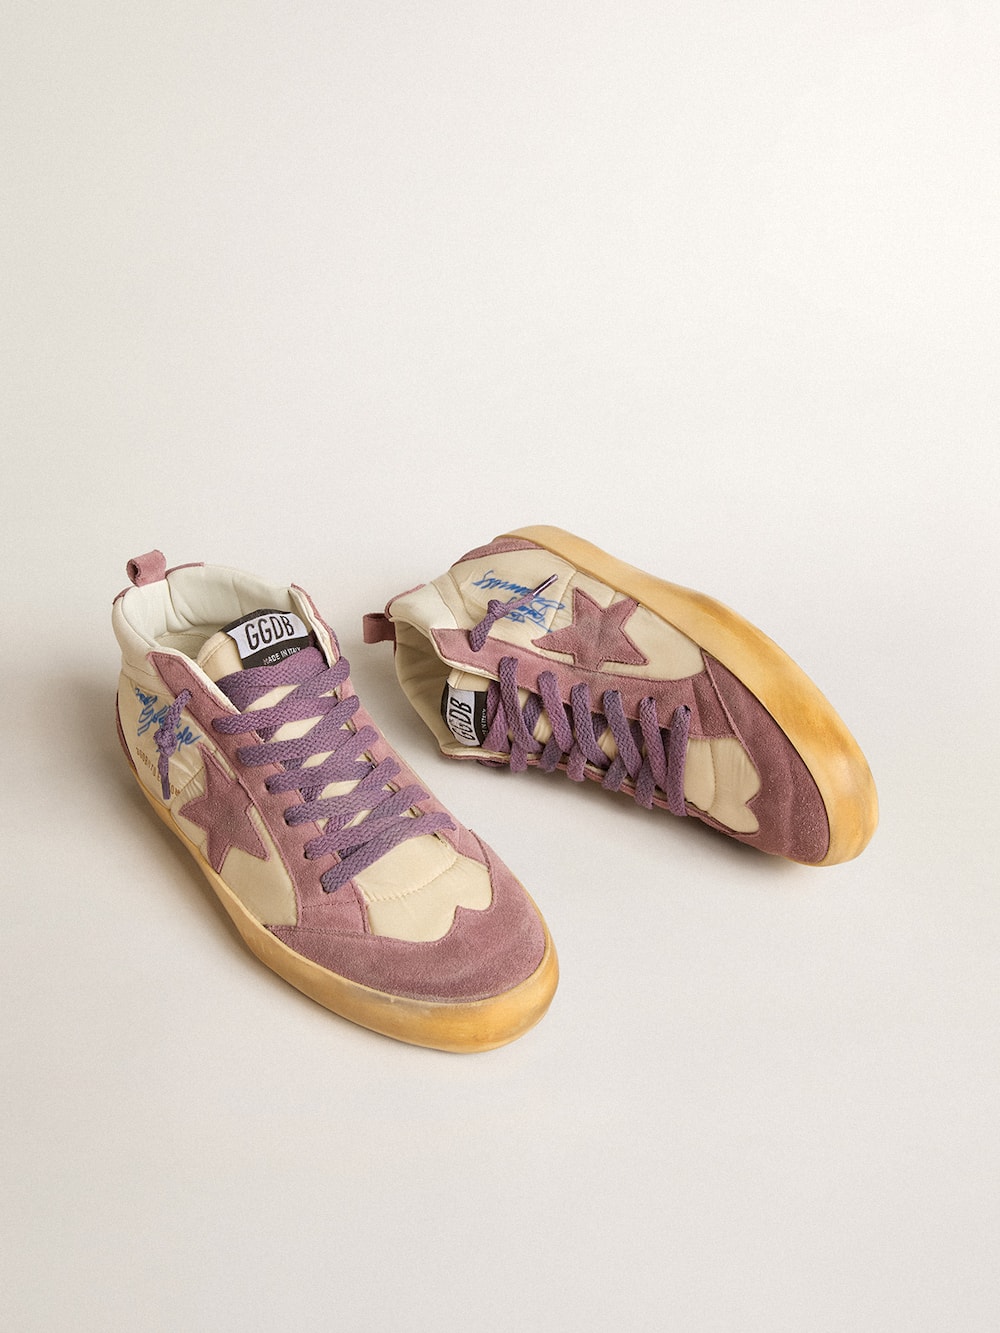 Golden Goose - Women’s Mid Star LAB in nylon and nappa with mauve suede star in 